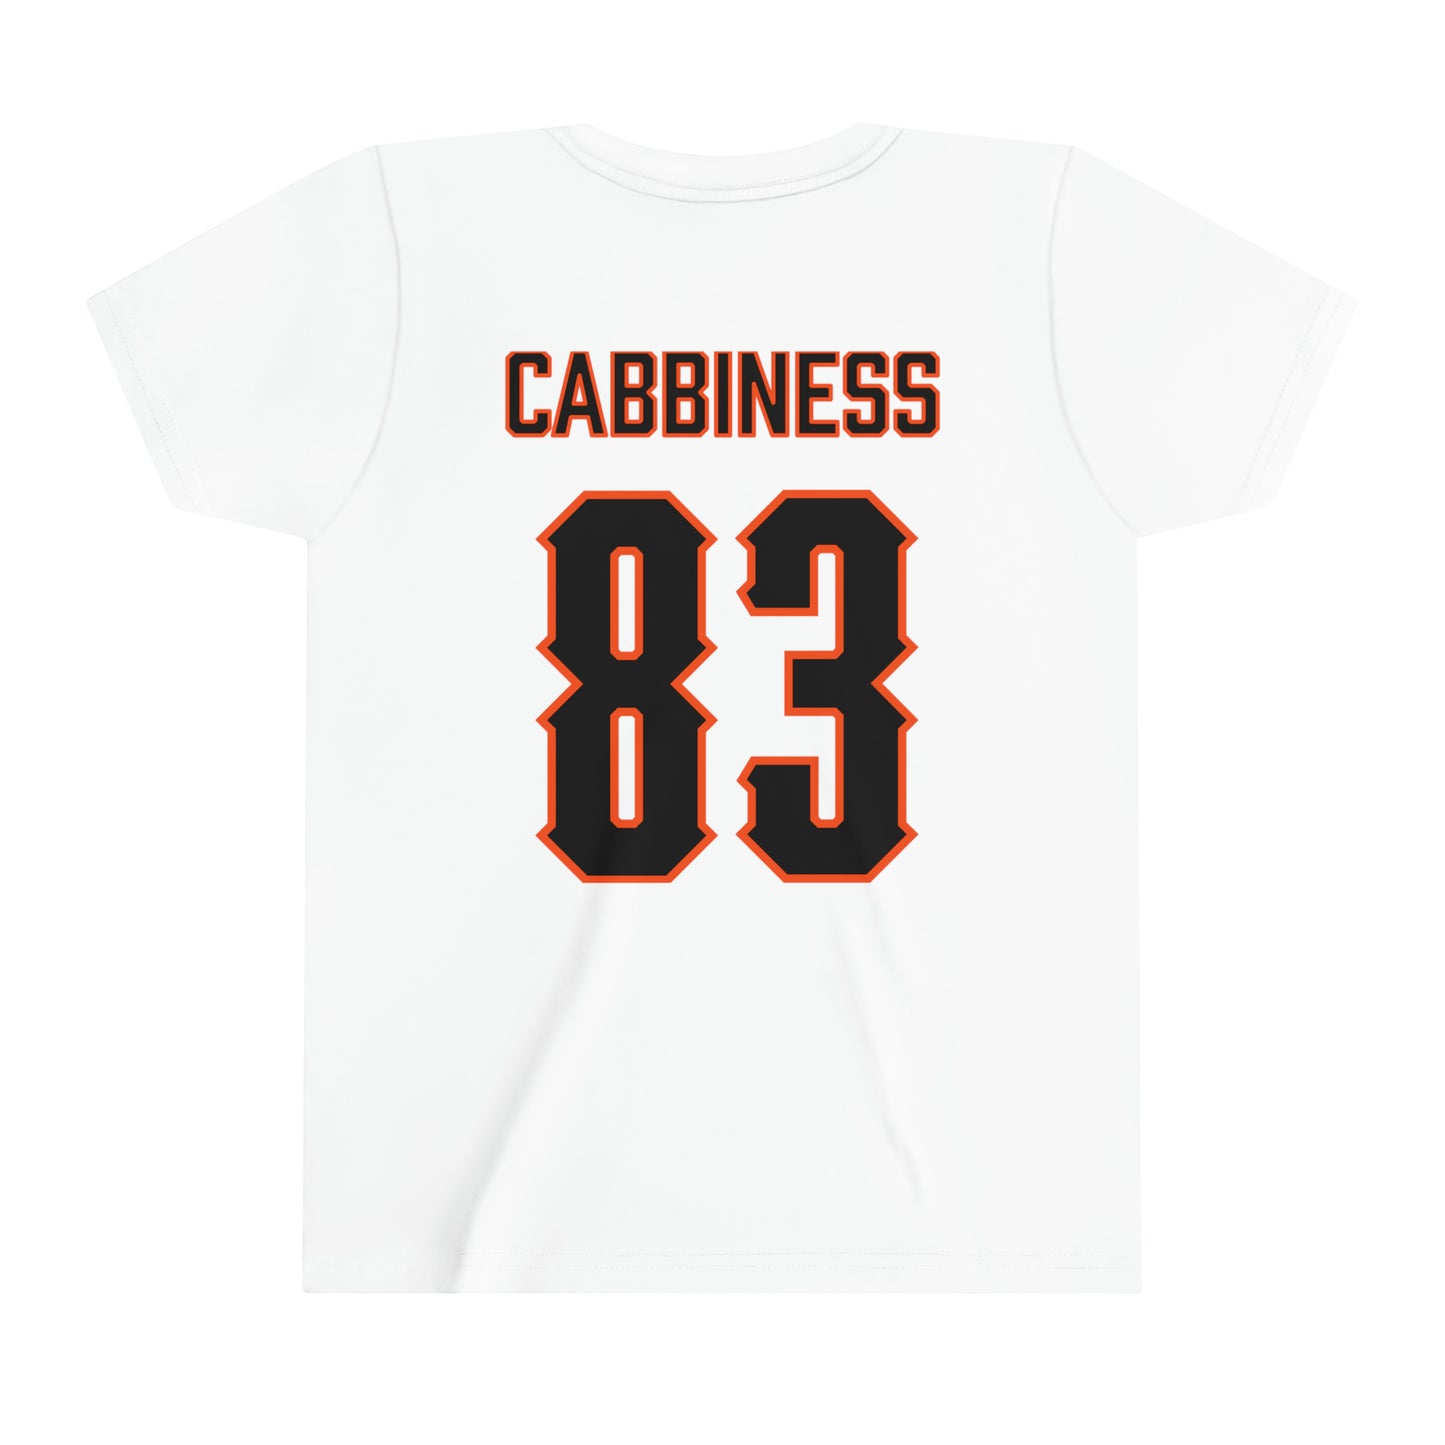 Cale Cabbiness #83 Cursive Cowboys Youth T-Shirt